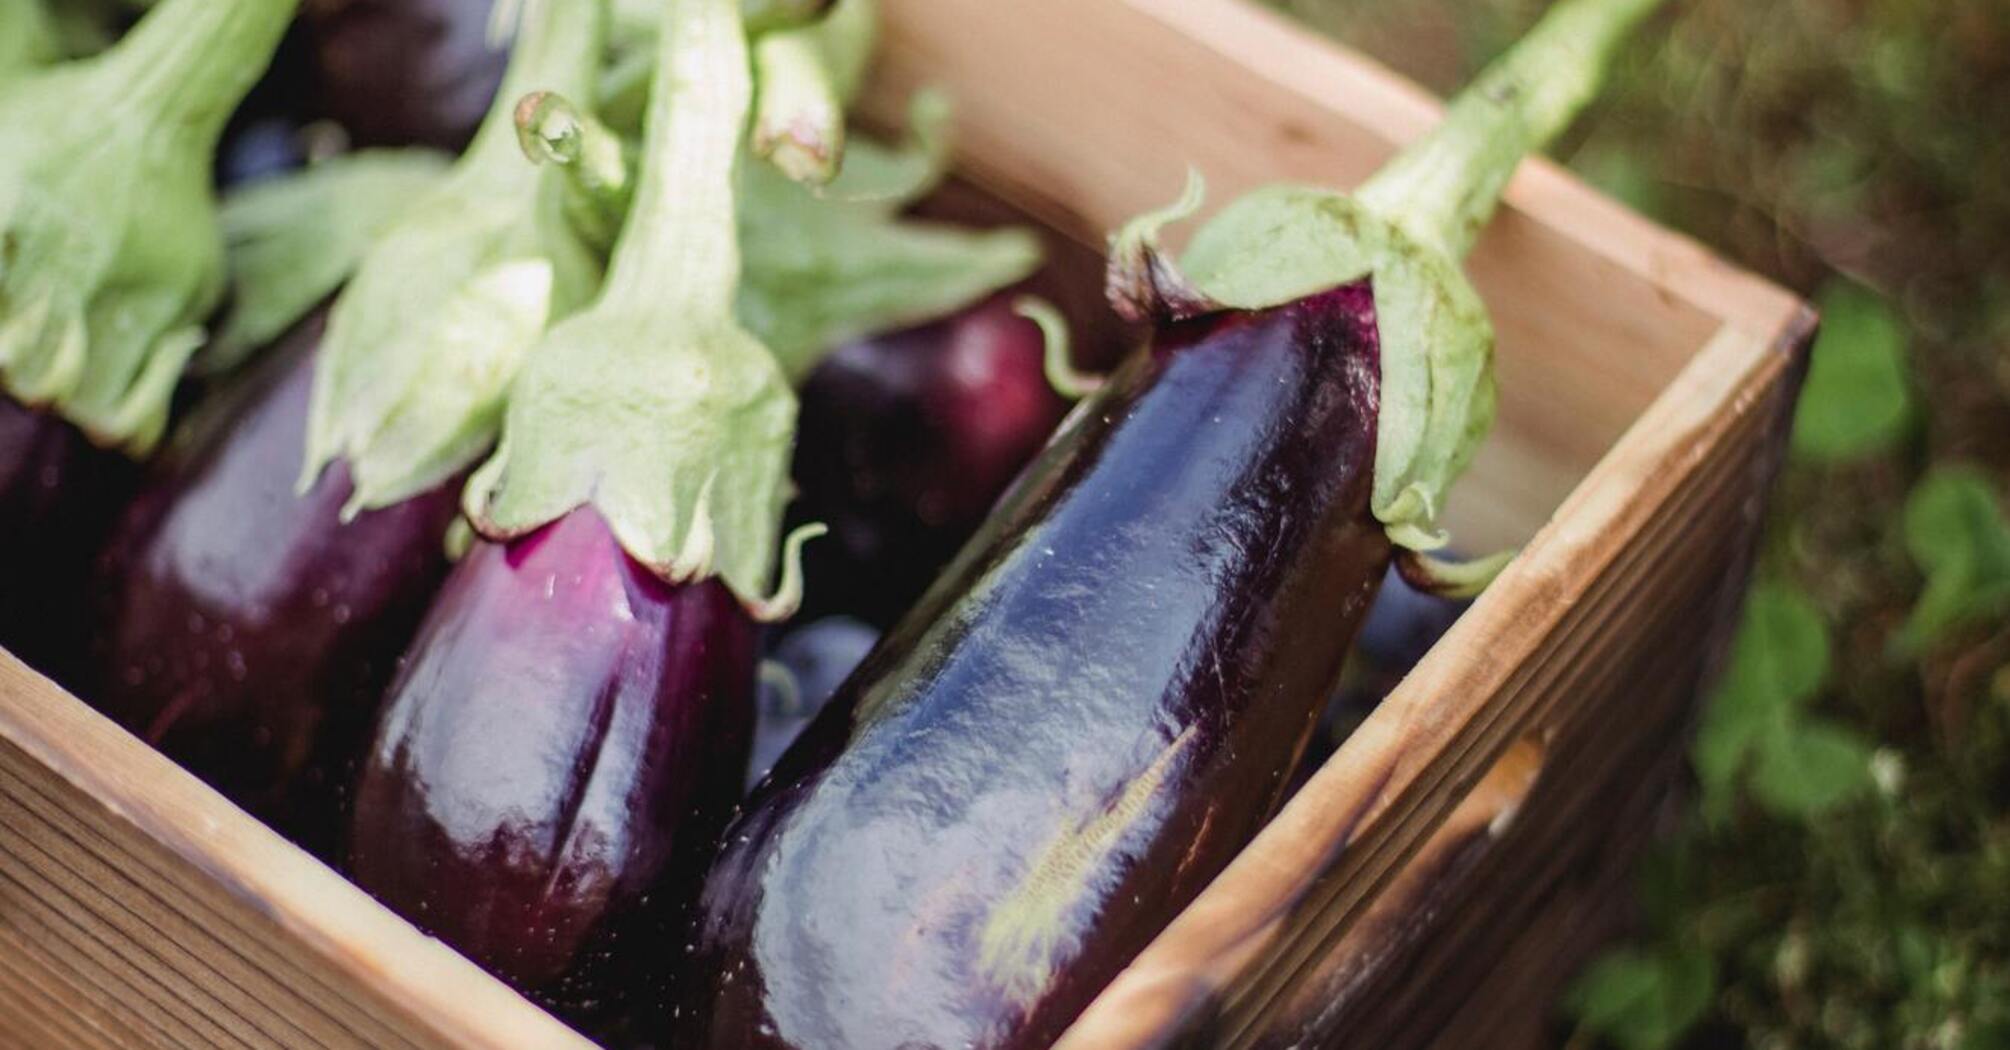 How to bake eggplants quickly: a simple appetizer option